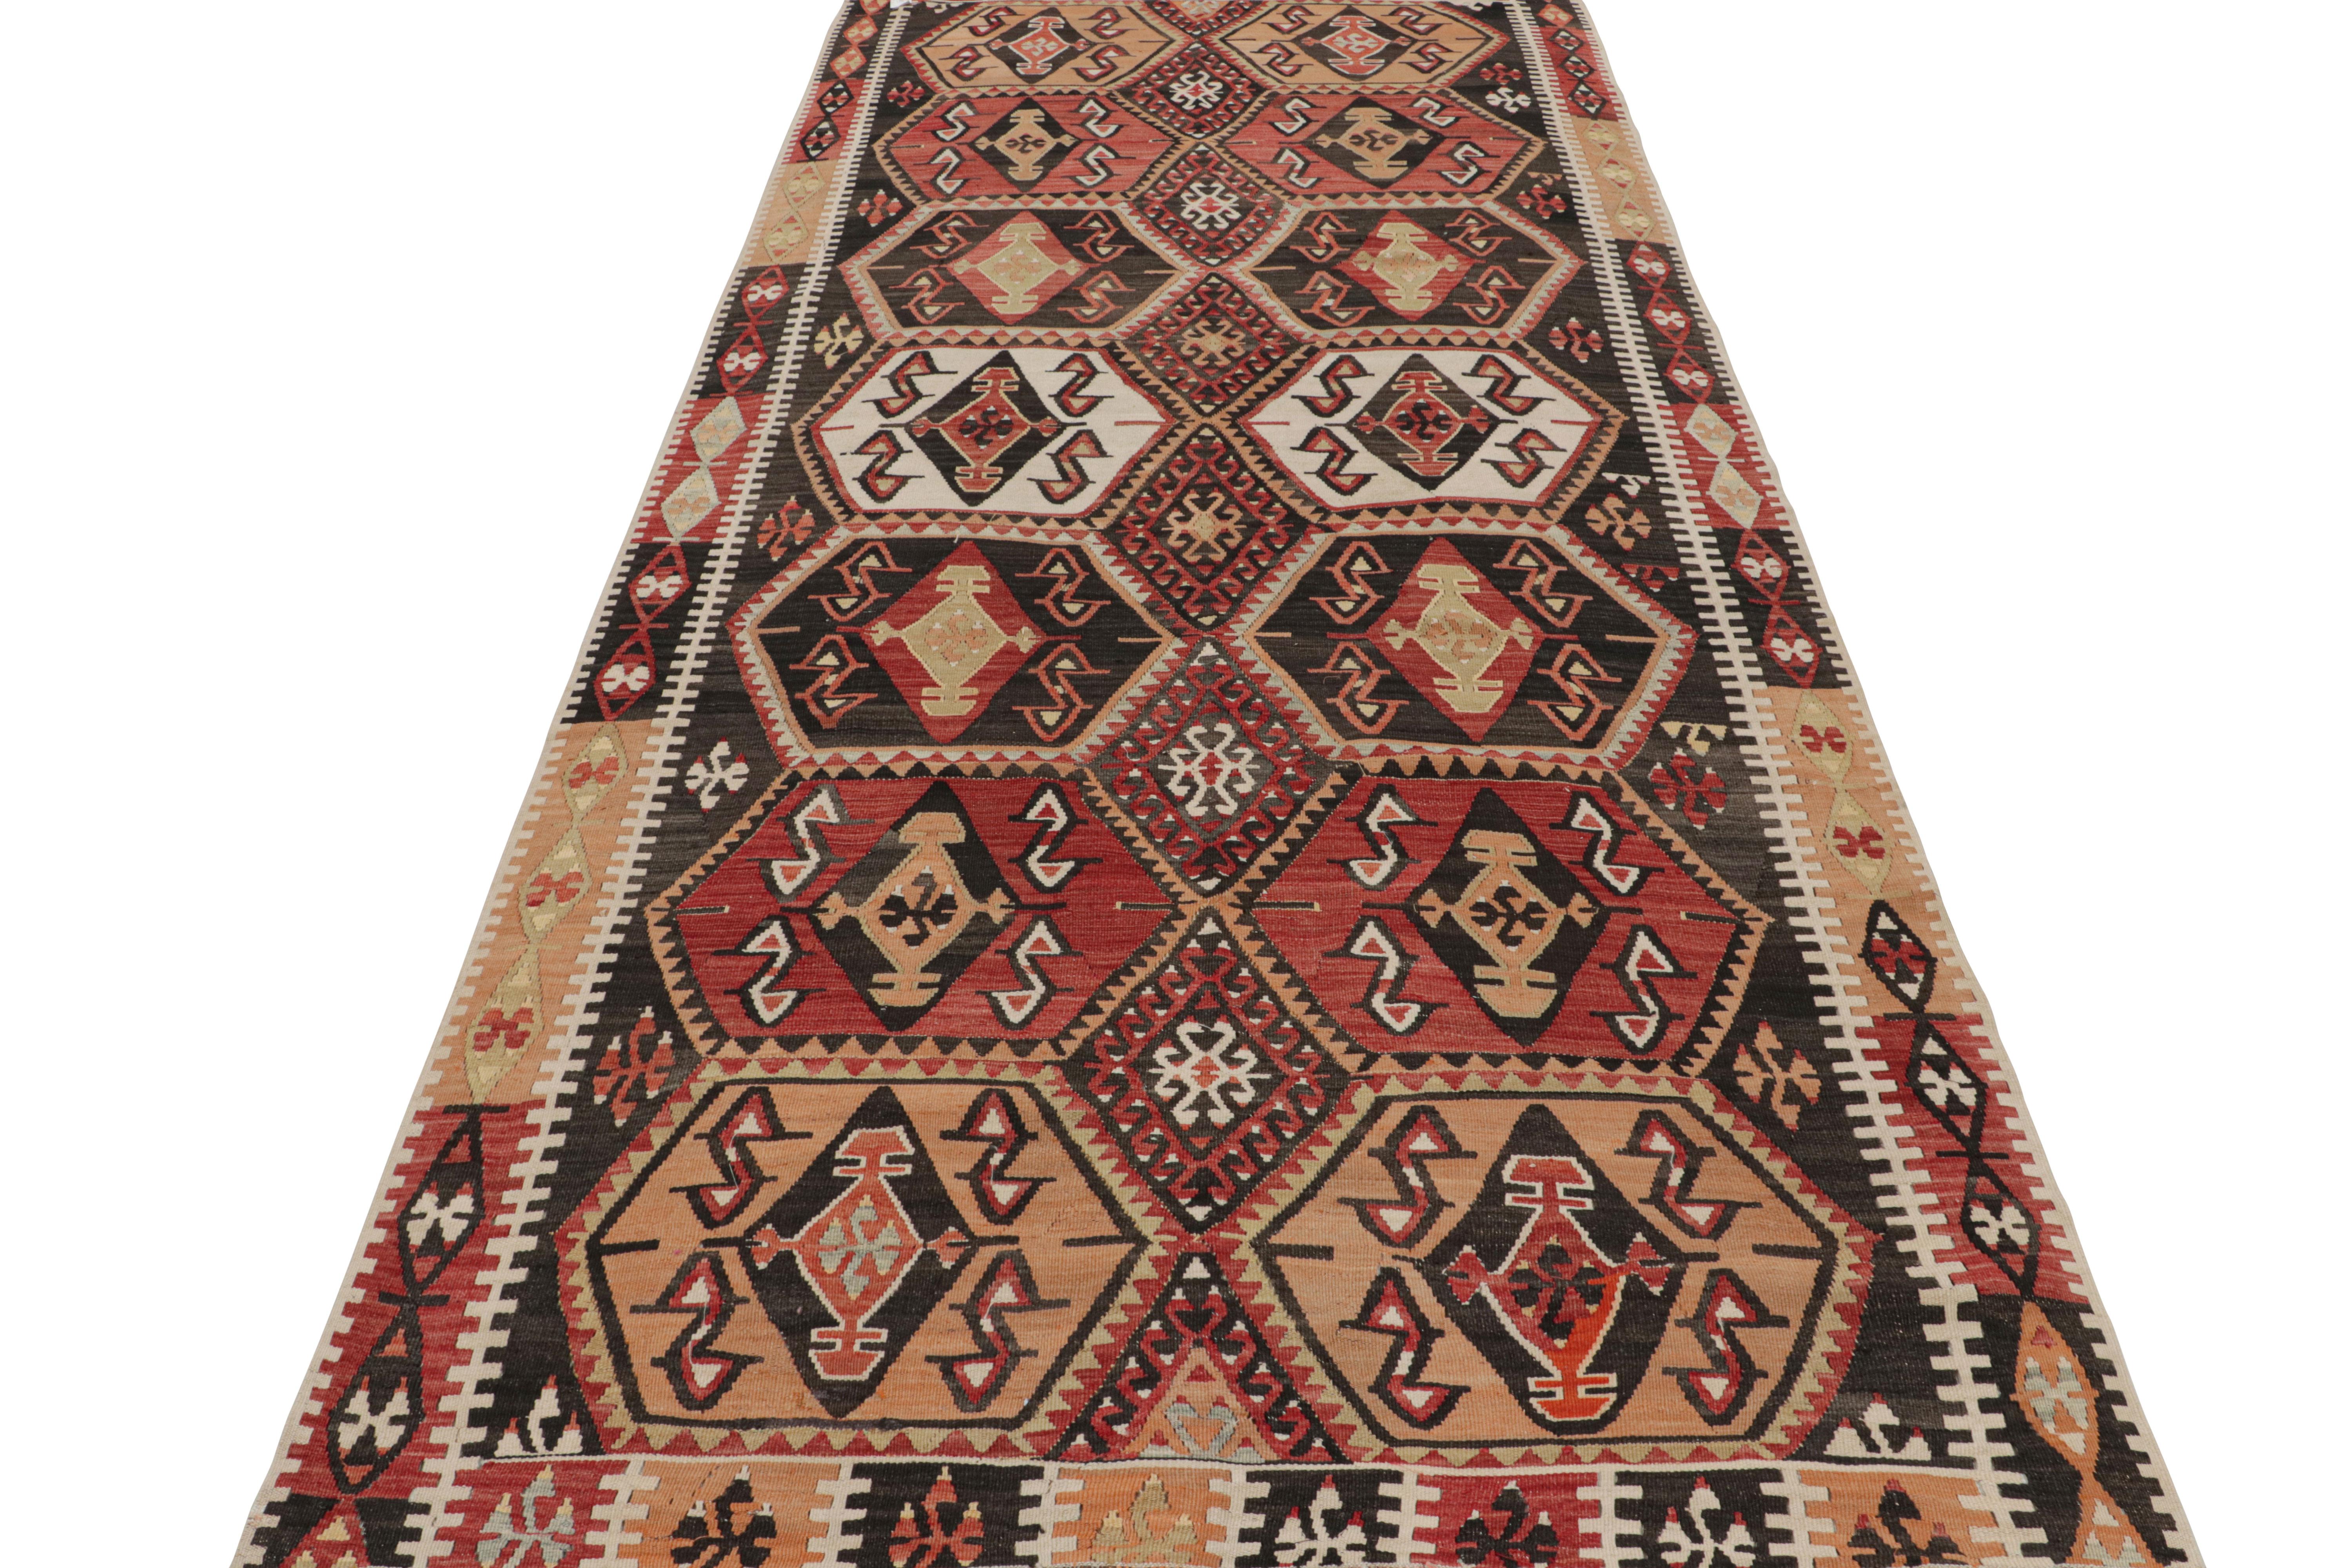 Vintage Midcentury Malatya Red and Off-White Wool Kilim Rug by Rug & Kilim In Good Condition For Sale In Long Island City, NY